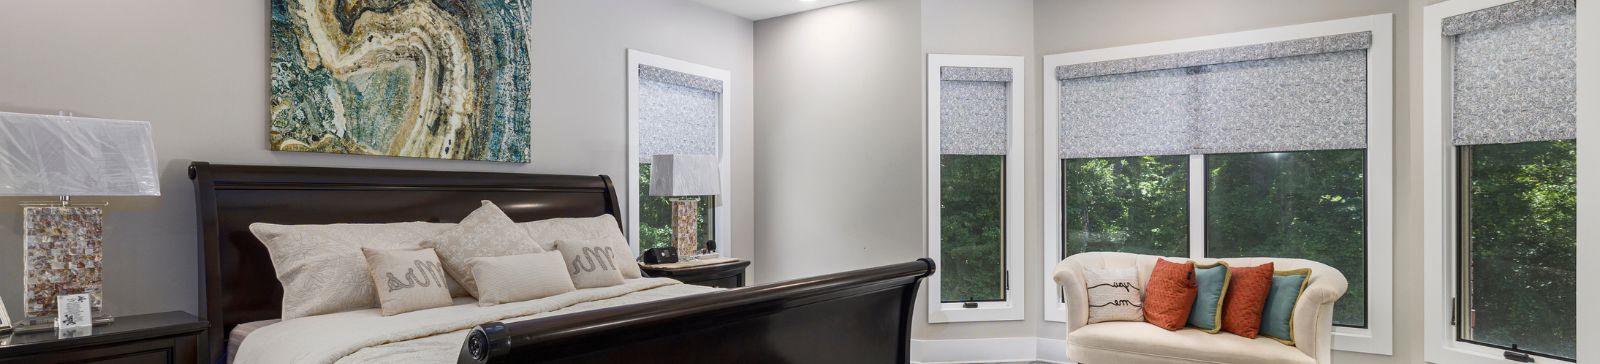 Blackout Shades: The Solution for Complete Darkness and Privacy